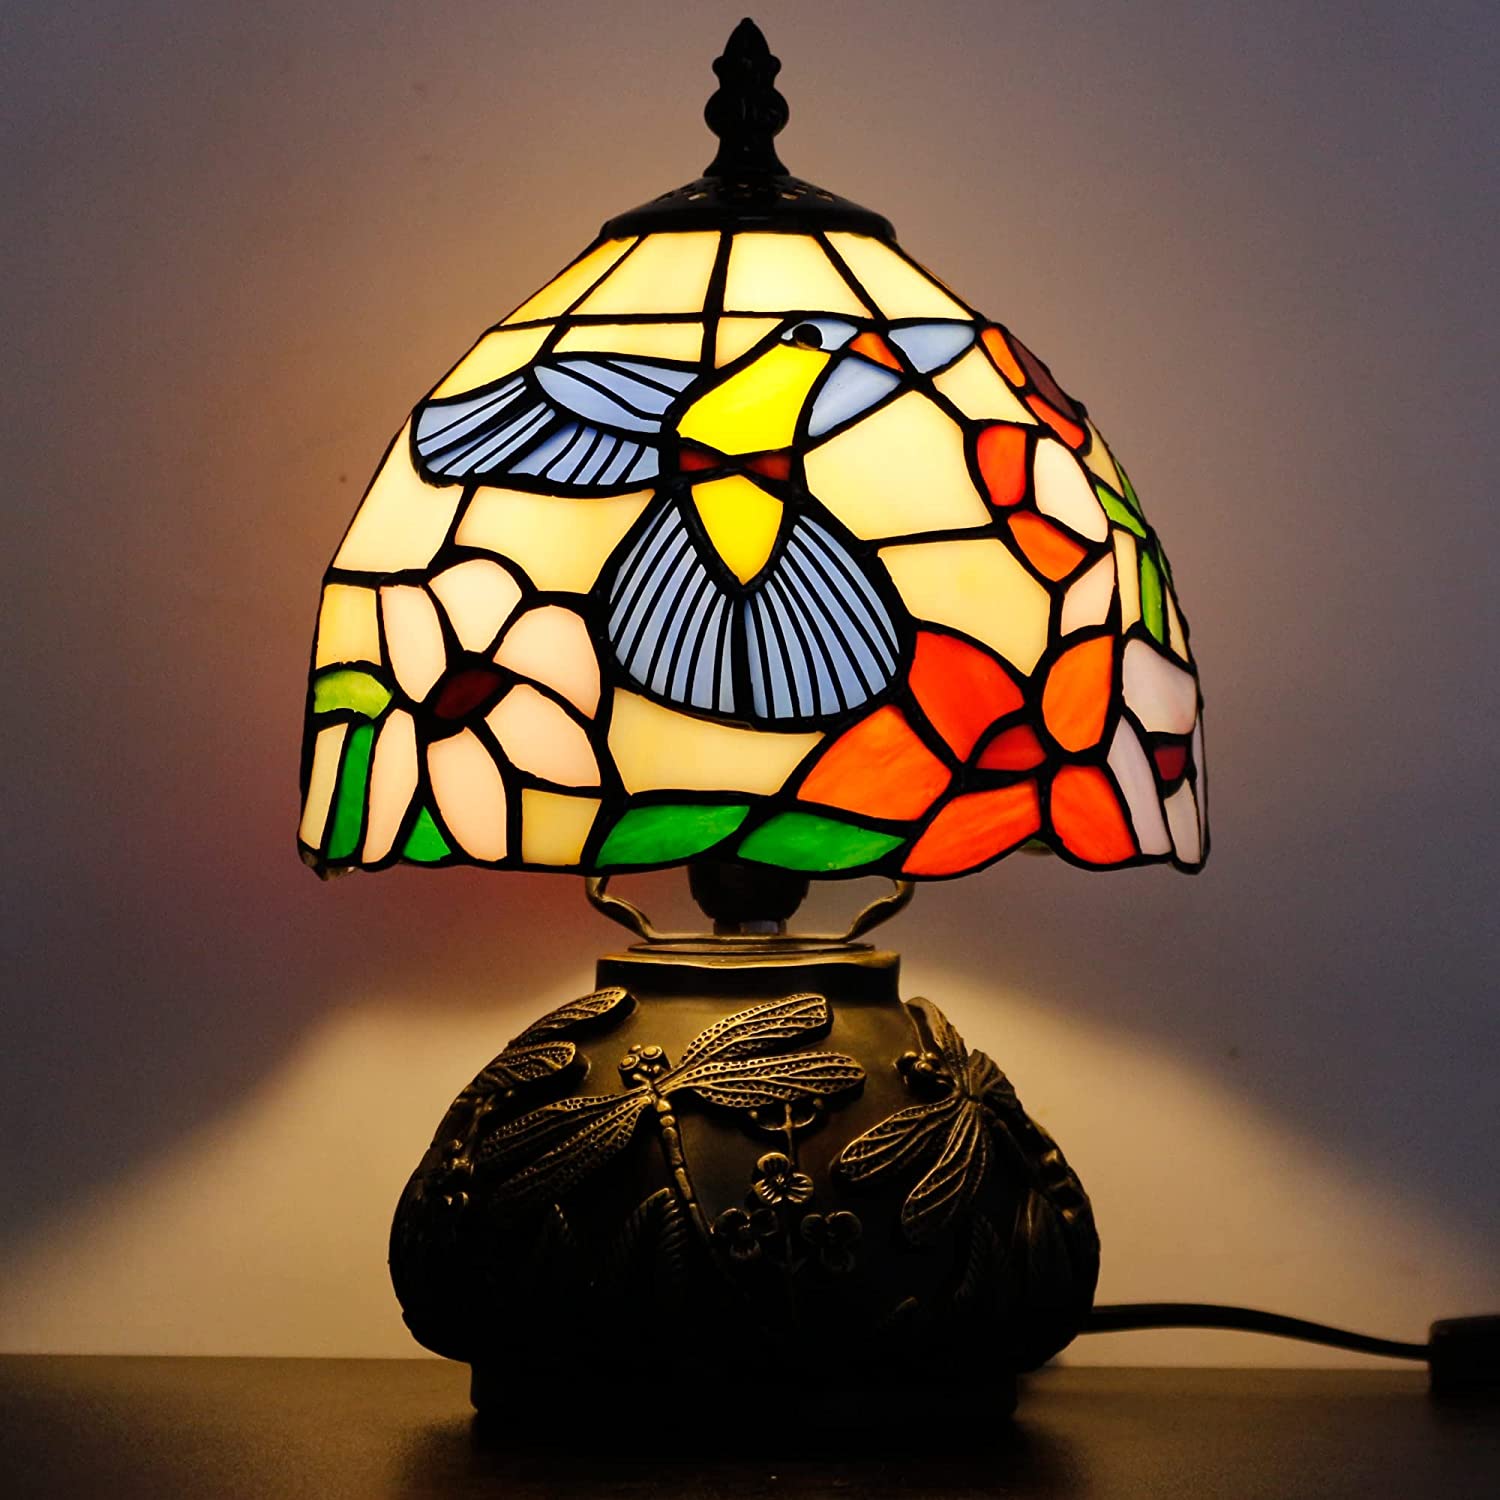 Werfactory® Small Tiffany Table Lamp Hummingbird Style Stained Glass Mushroom Lamp